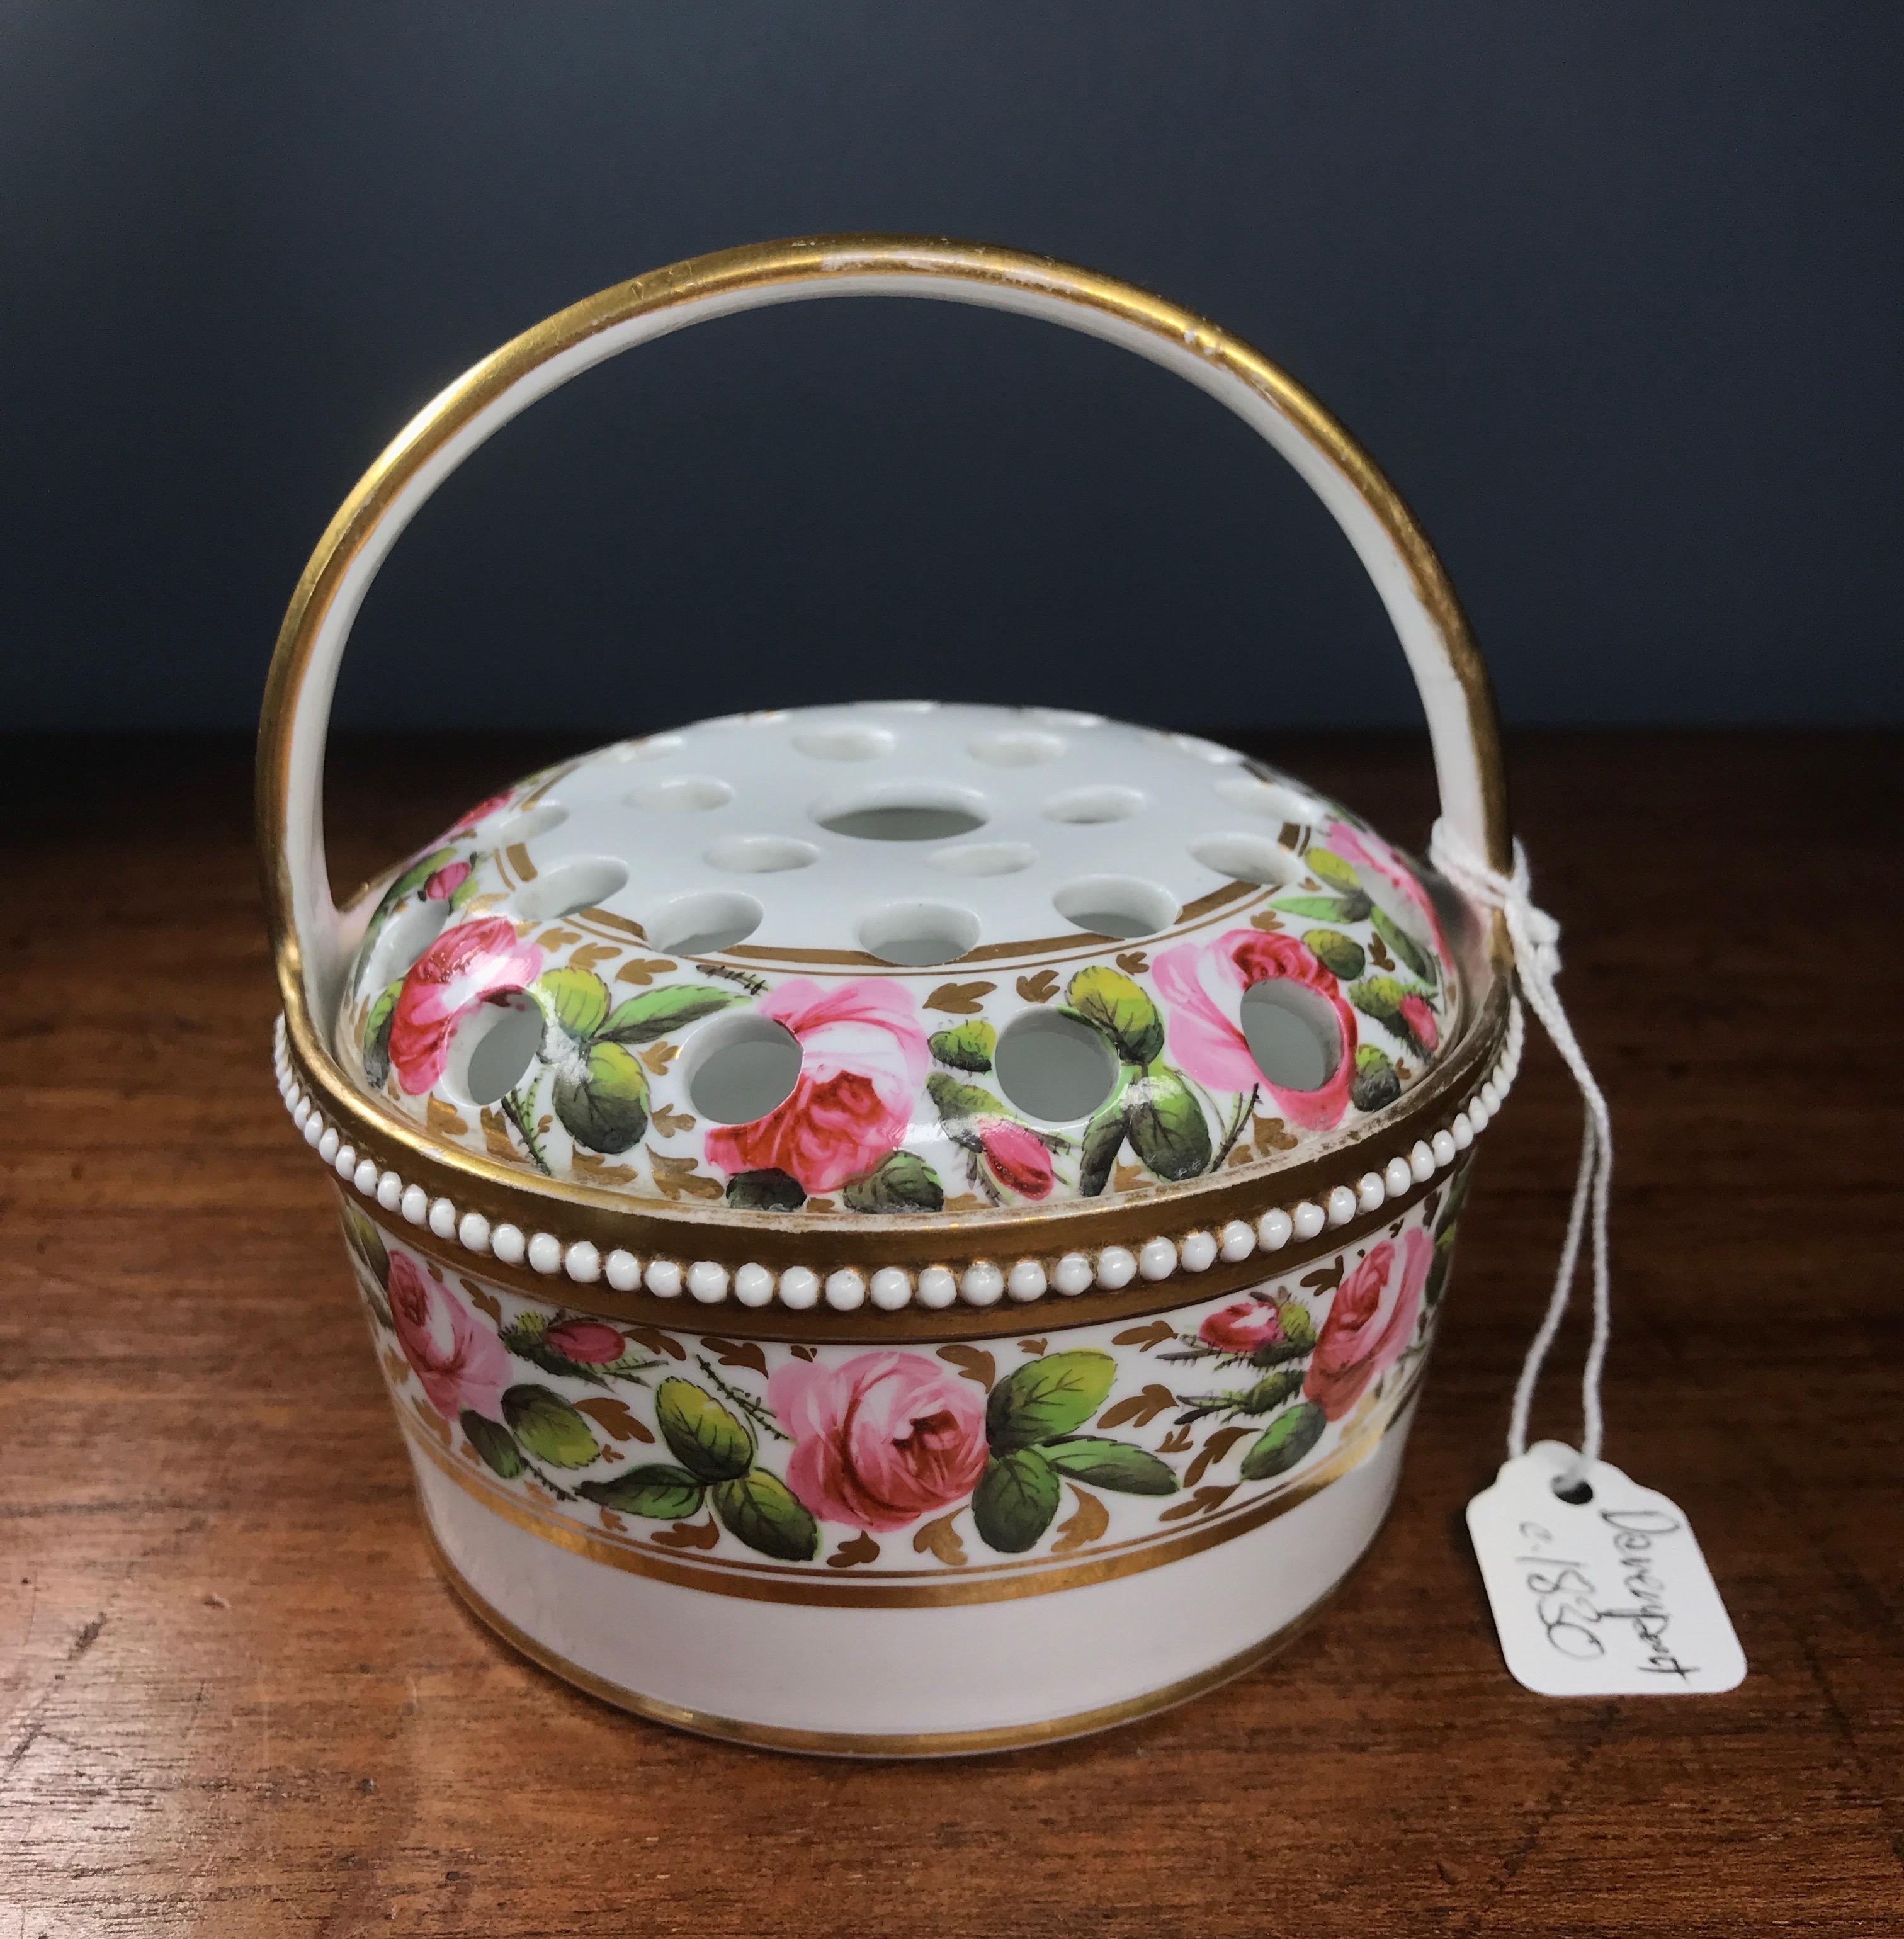 English bone china potpurri basket and pierced cover, decorated with wide bands of roseheads and gilt foliage, the rim with a beaded moulding, a high handle overhead.

Pattern no 1533 in gold, possibly Davenport. Circa 1830.